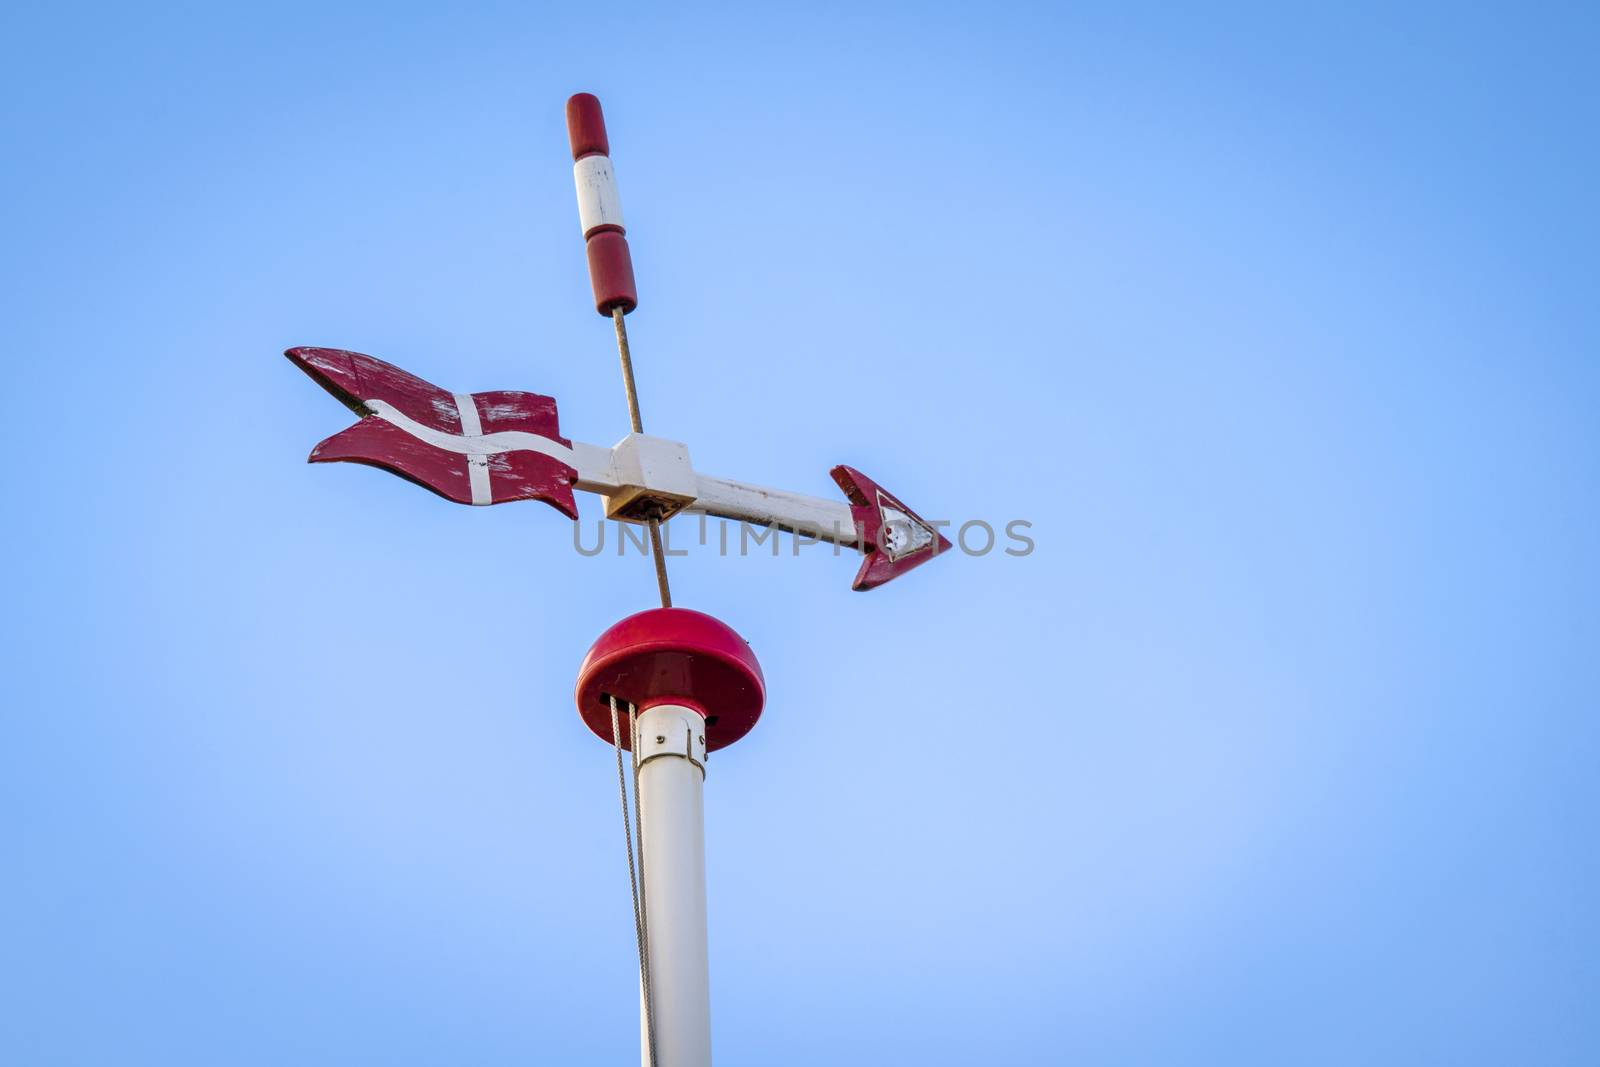 Danish weather vane with the flag of Denmark and an arrow sign pointing right